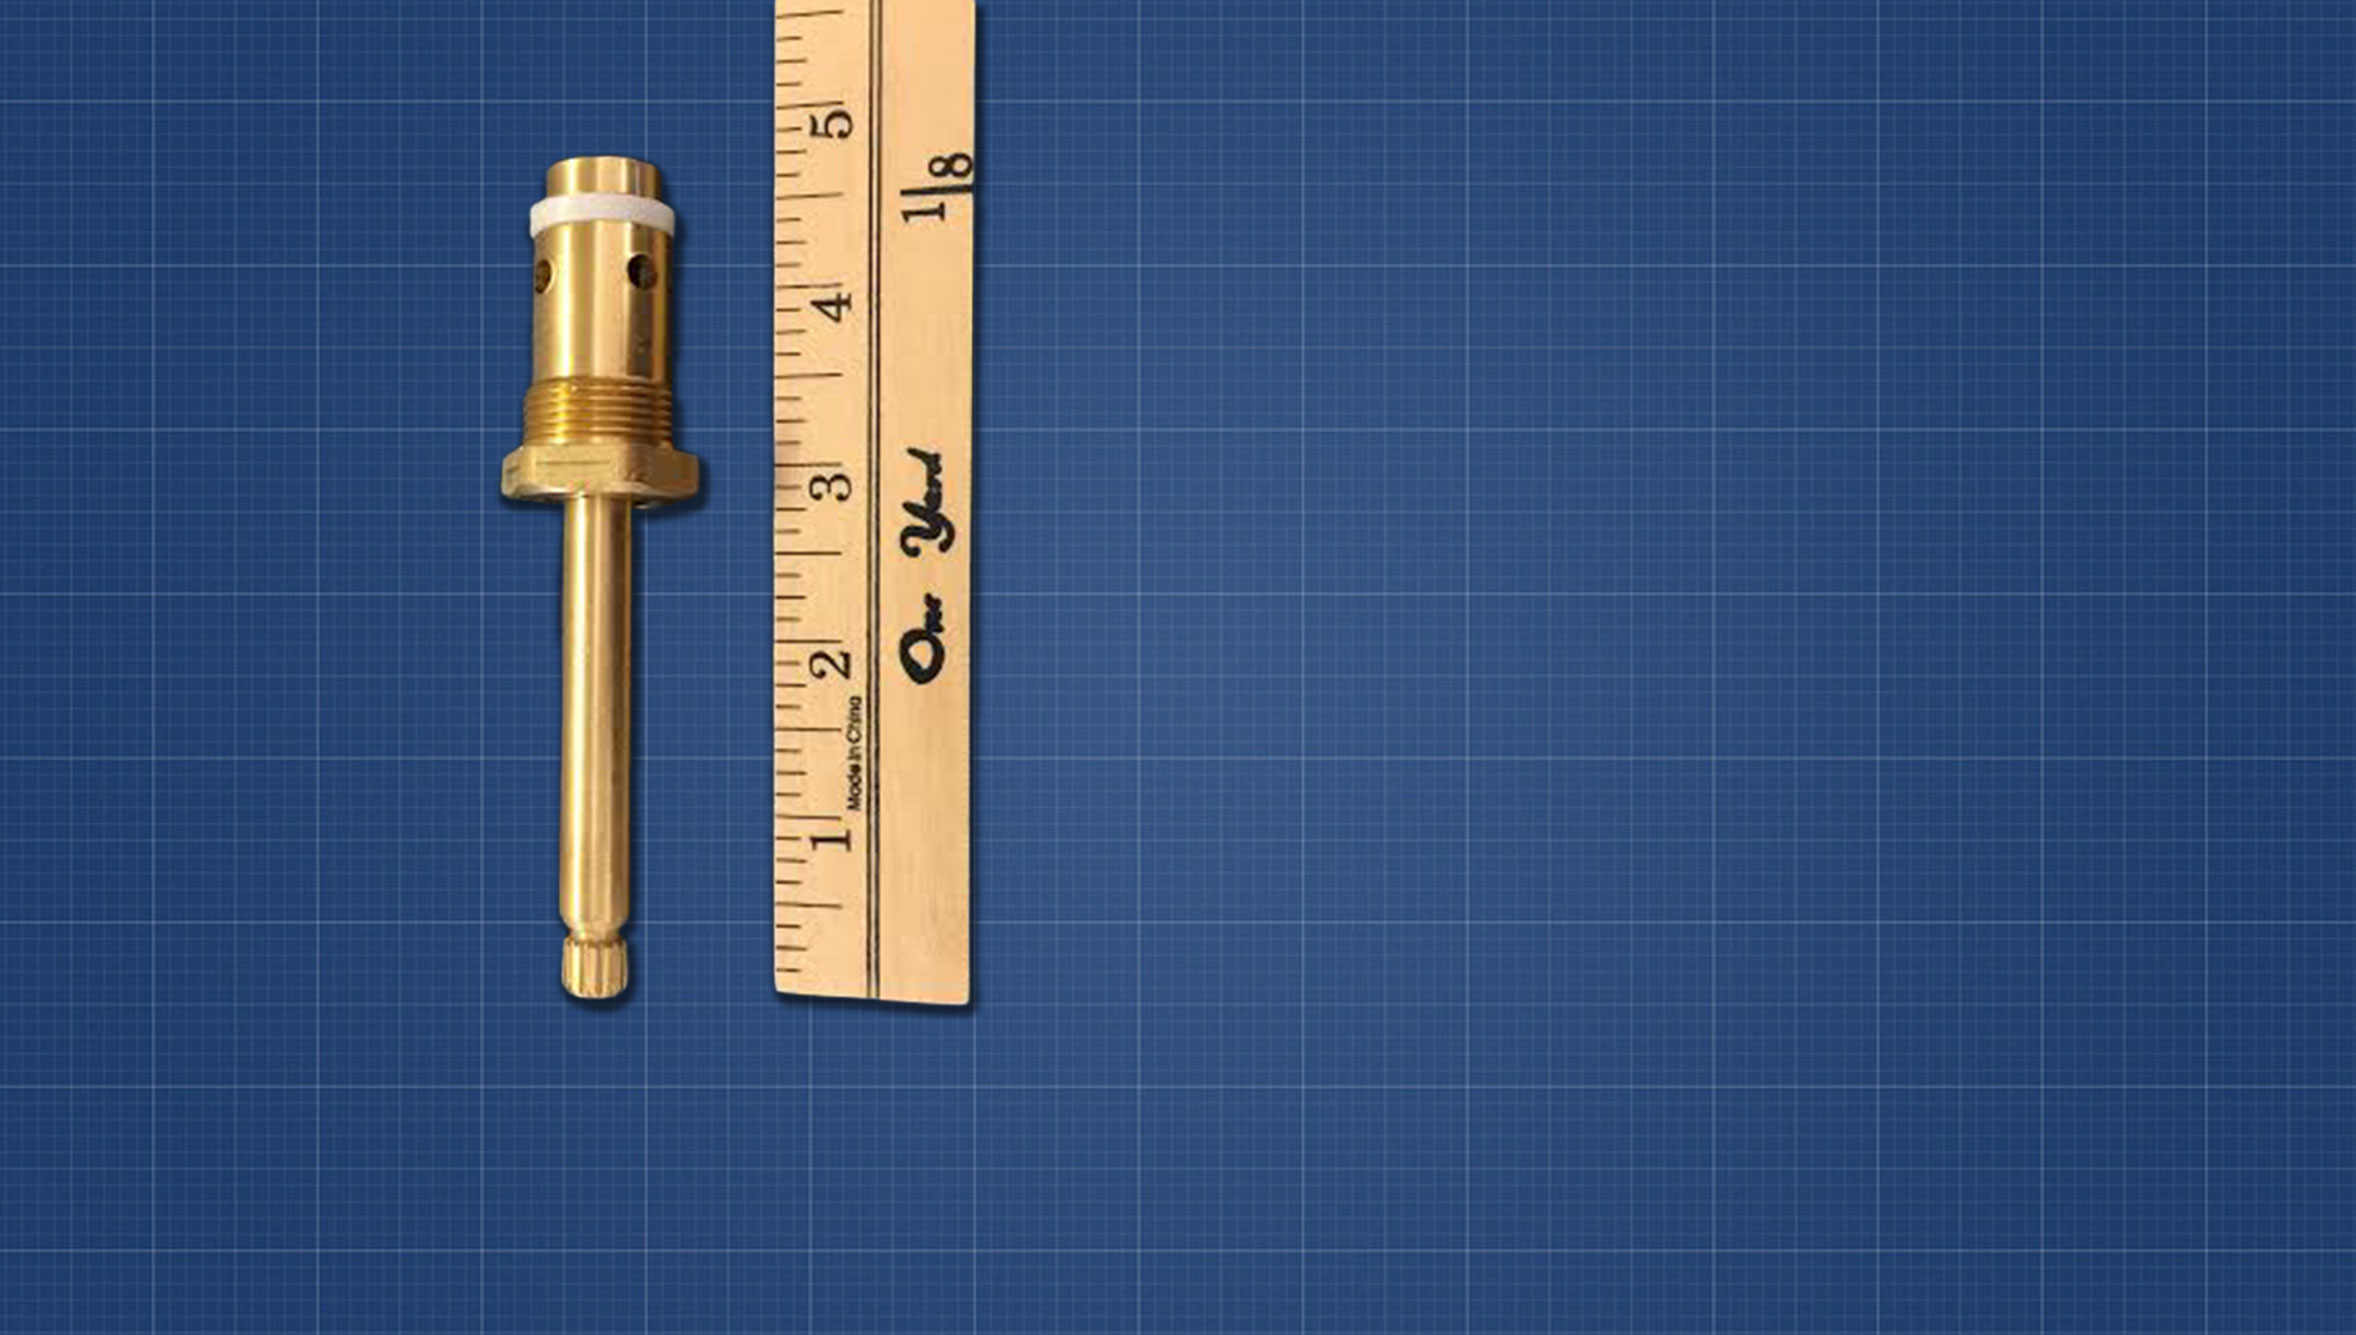 plumbing part with ruler